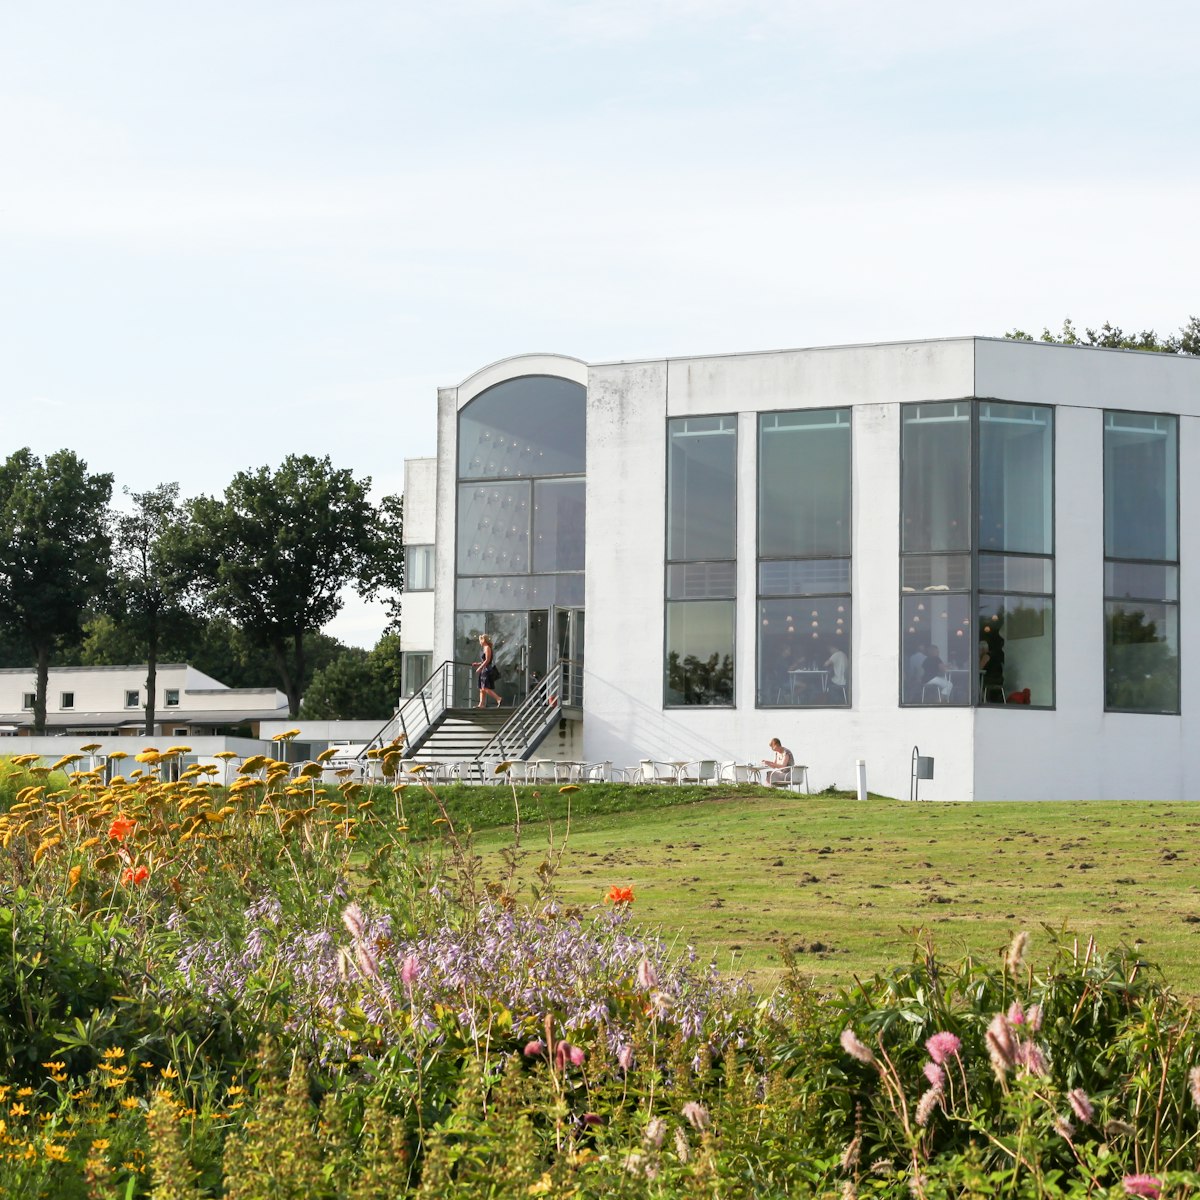 Trapholt museum building, a museum of contemporary art and design located in Kolding, Denmark.